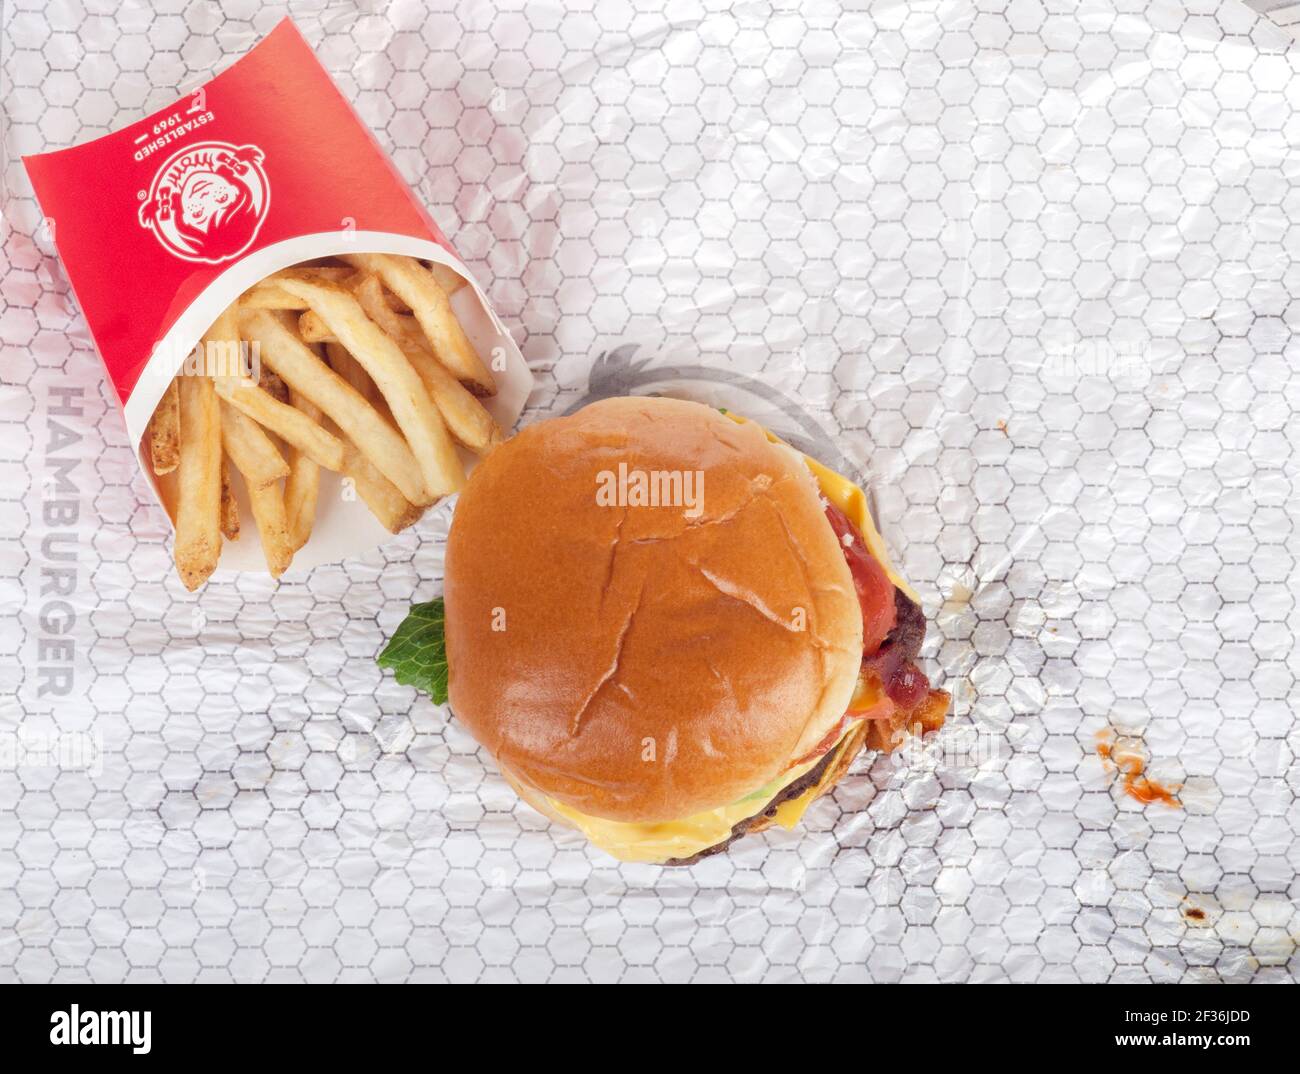 Wendy's Dave's Single Classic Cheeseburger with French Fries or Chips on Wrapper Stock Photo